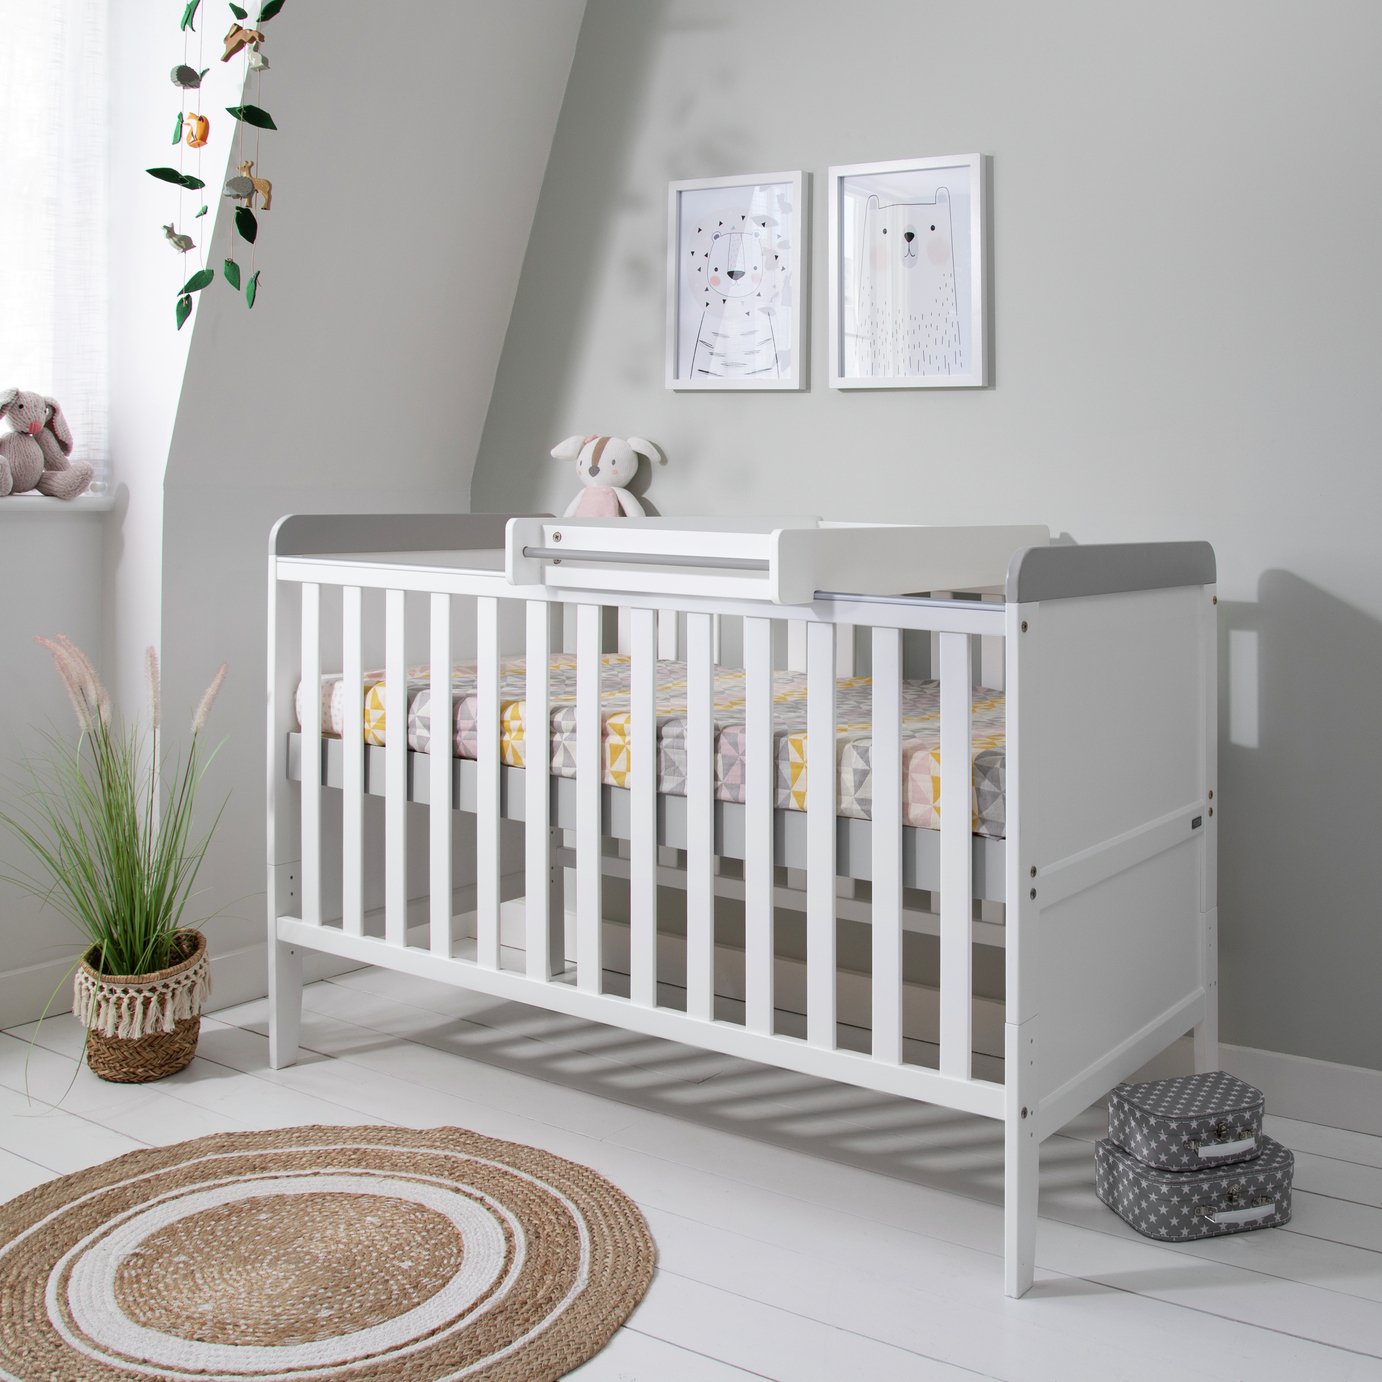 Tutti Bambini Rio Cot Bed & Changer with Mattress Review